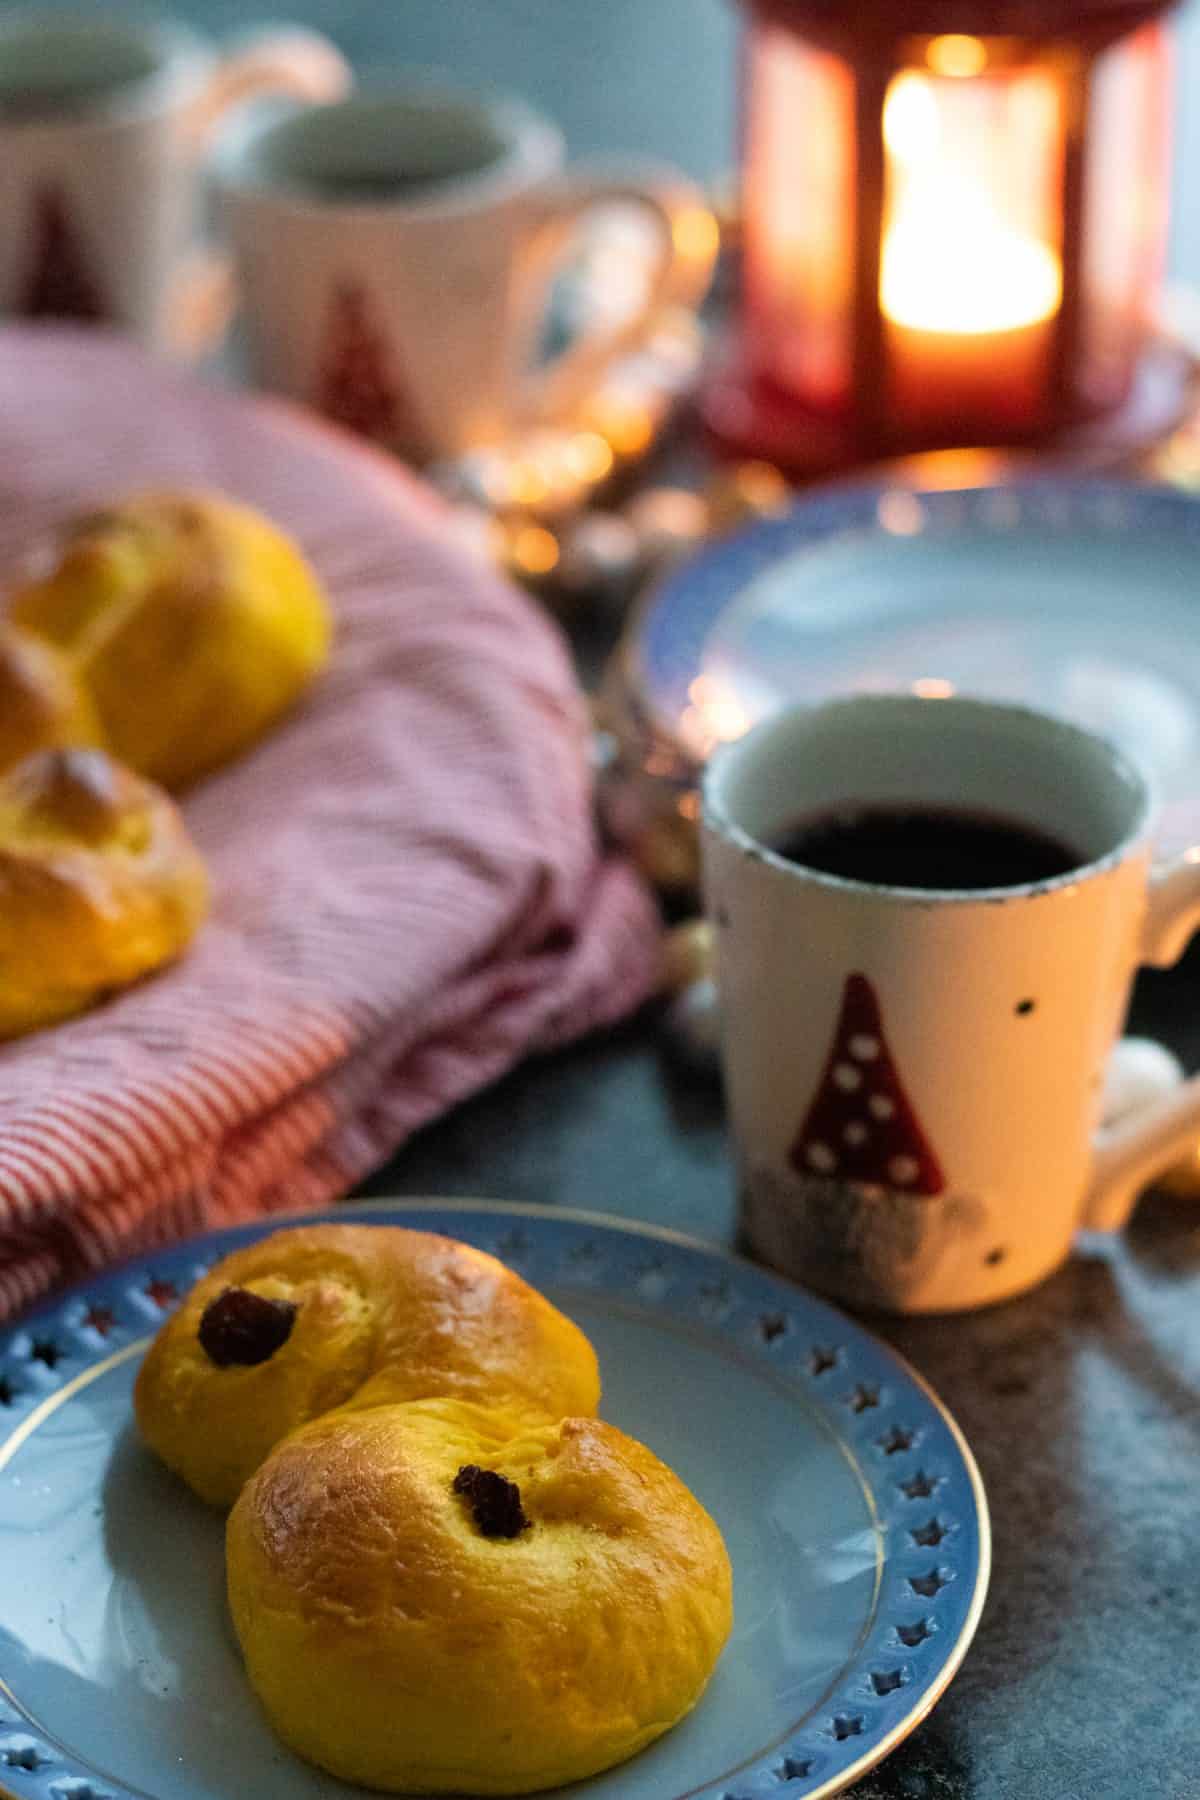 a Swedish saffron bun on a plate in front of a cup of glögg.